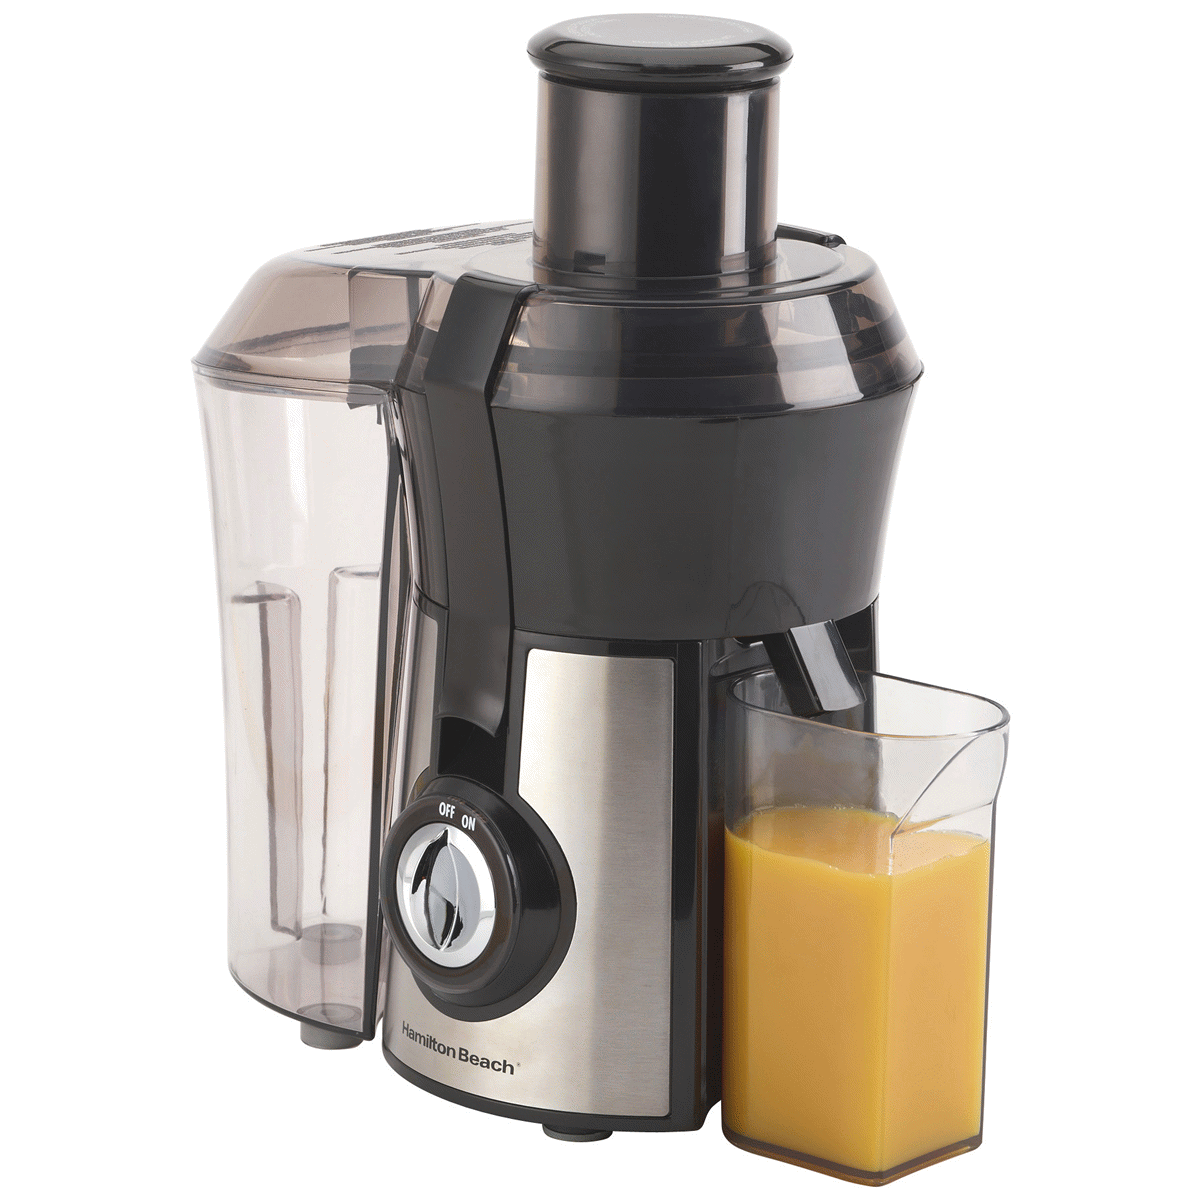 Hamilton Beach 1 Speed Big Mouth Juice Extractor in White